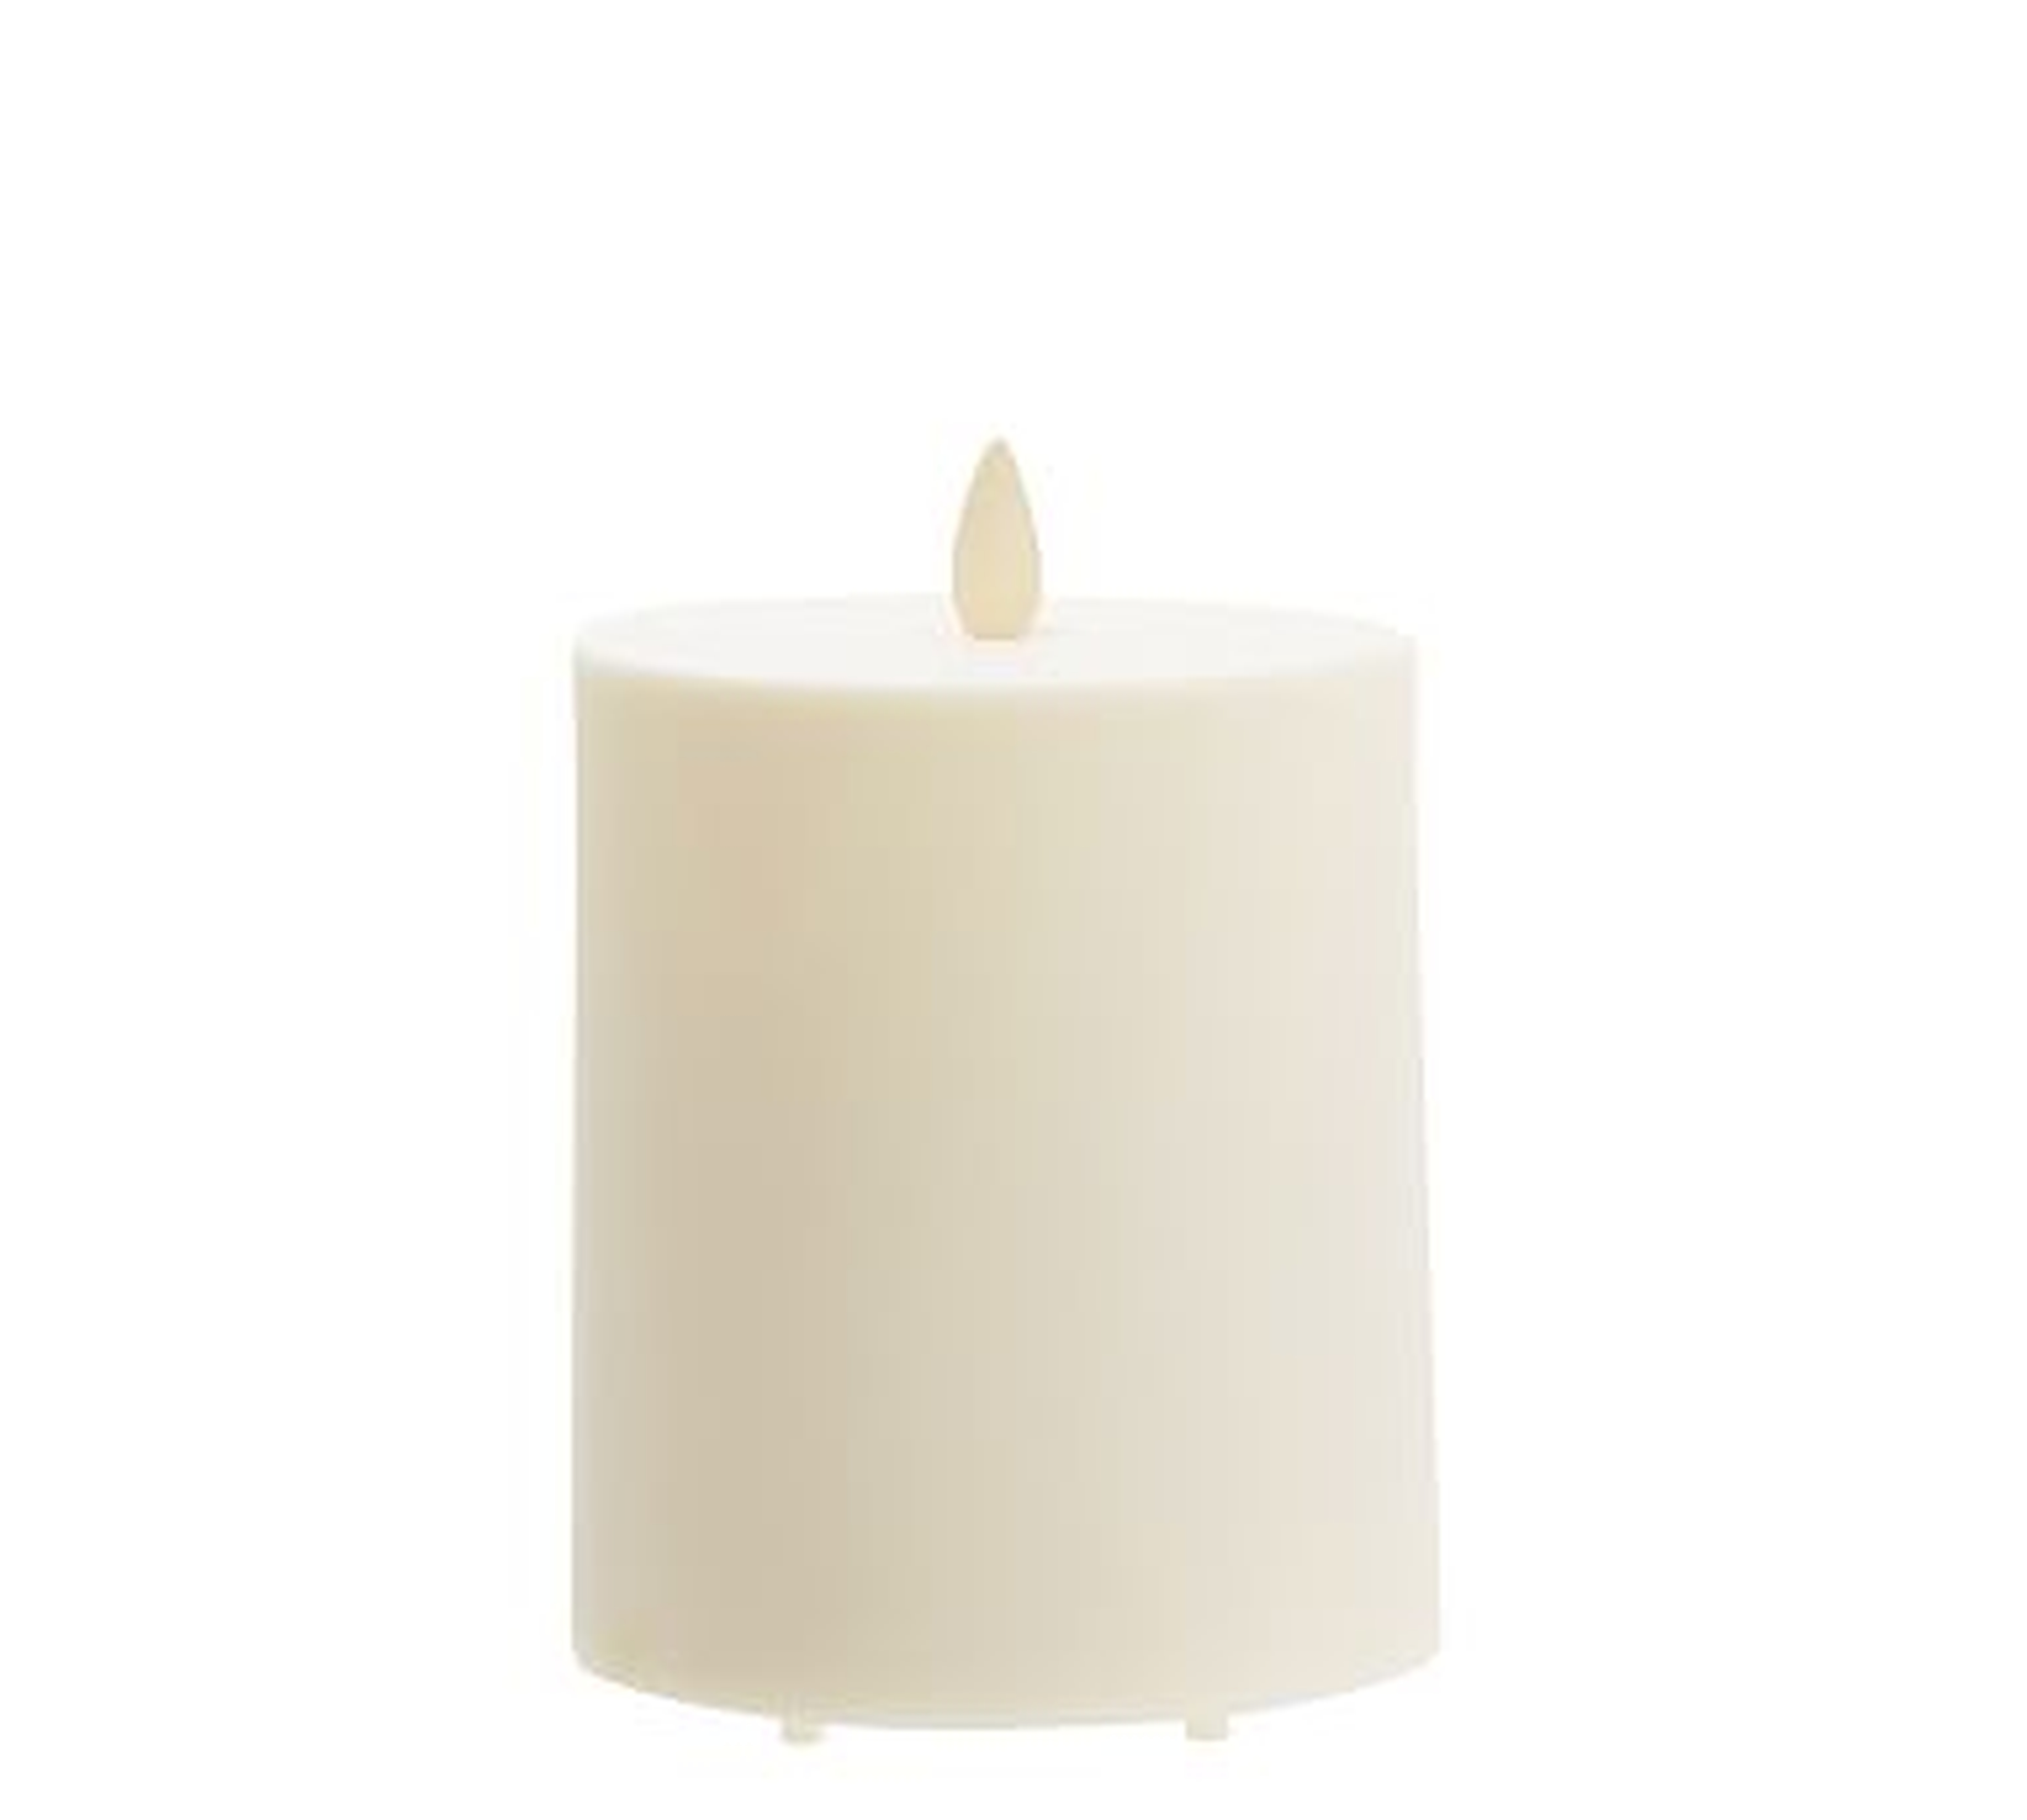 Premium Flickering Flameless Outdoor Wax Pillar Candle, 4"x4.5" - Ivory - Pottery Barn